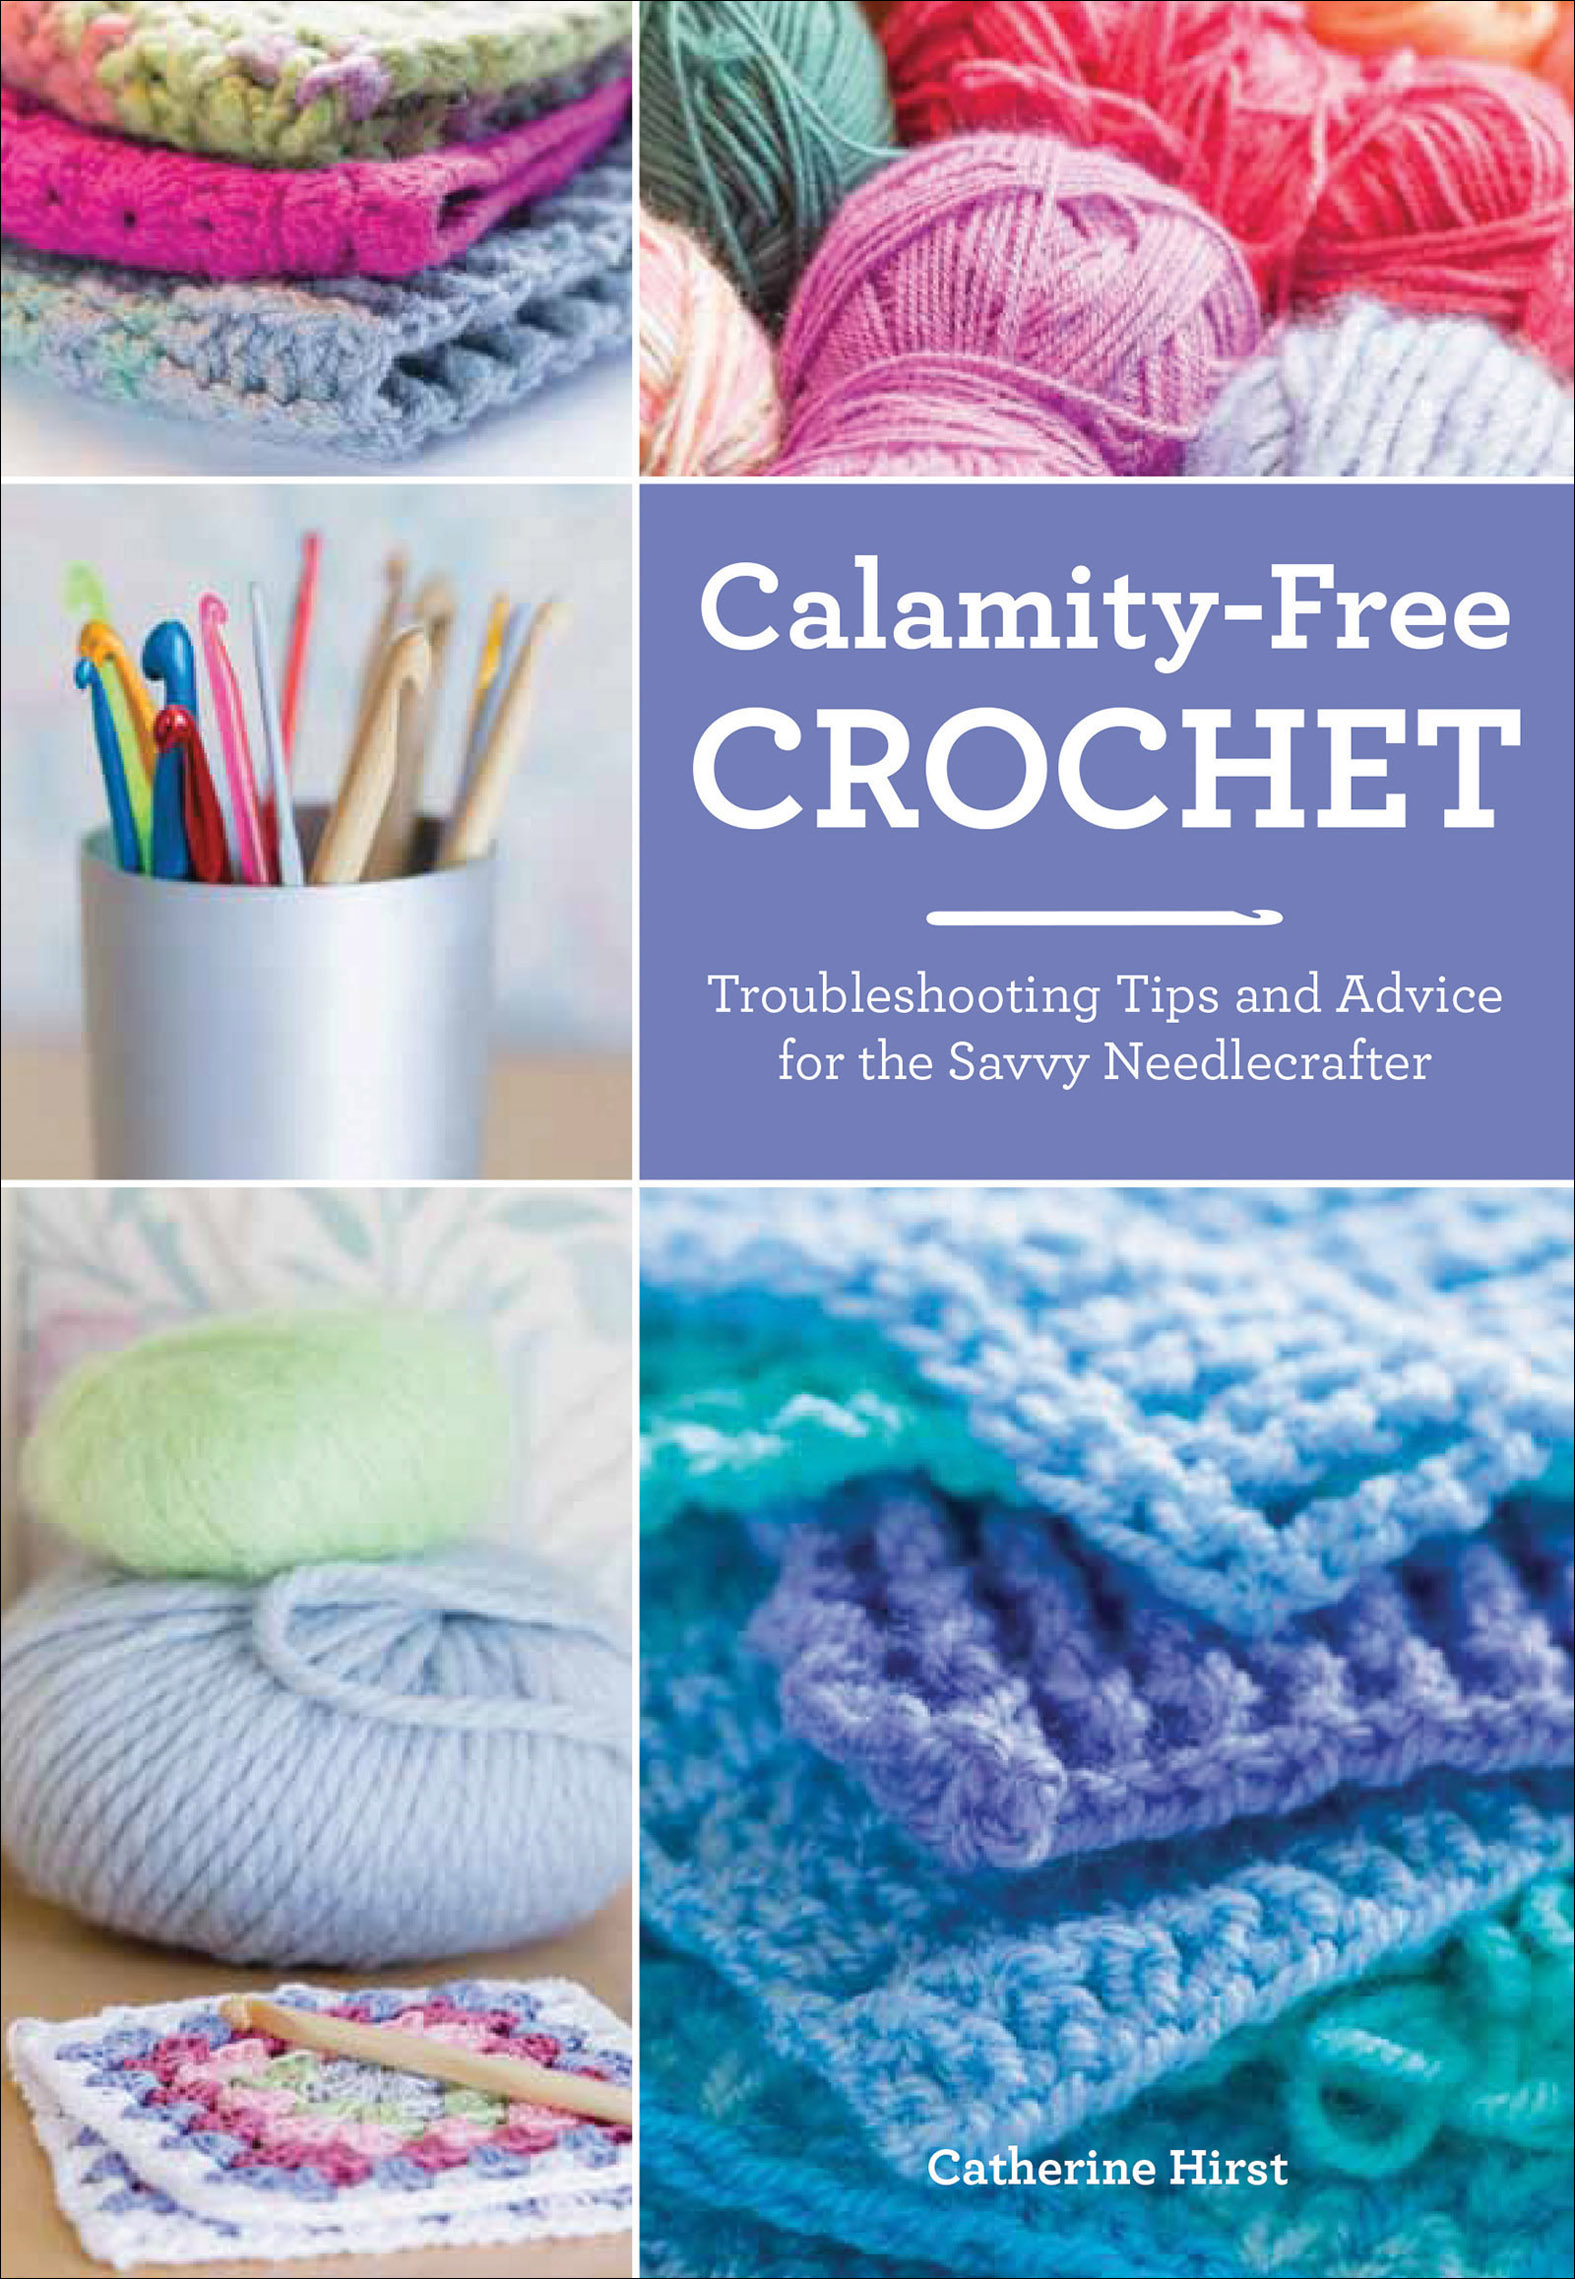 Calamity-Free Crochet Trouble-shooting Tips and Advice for the Savvy Needlecrafter cover image